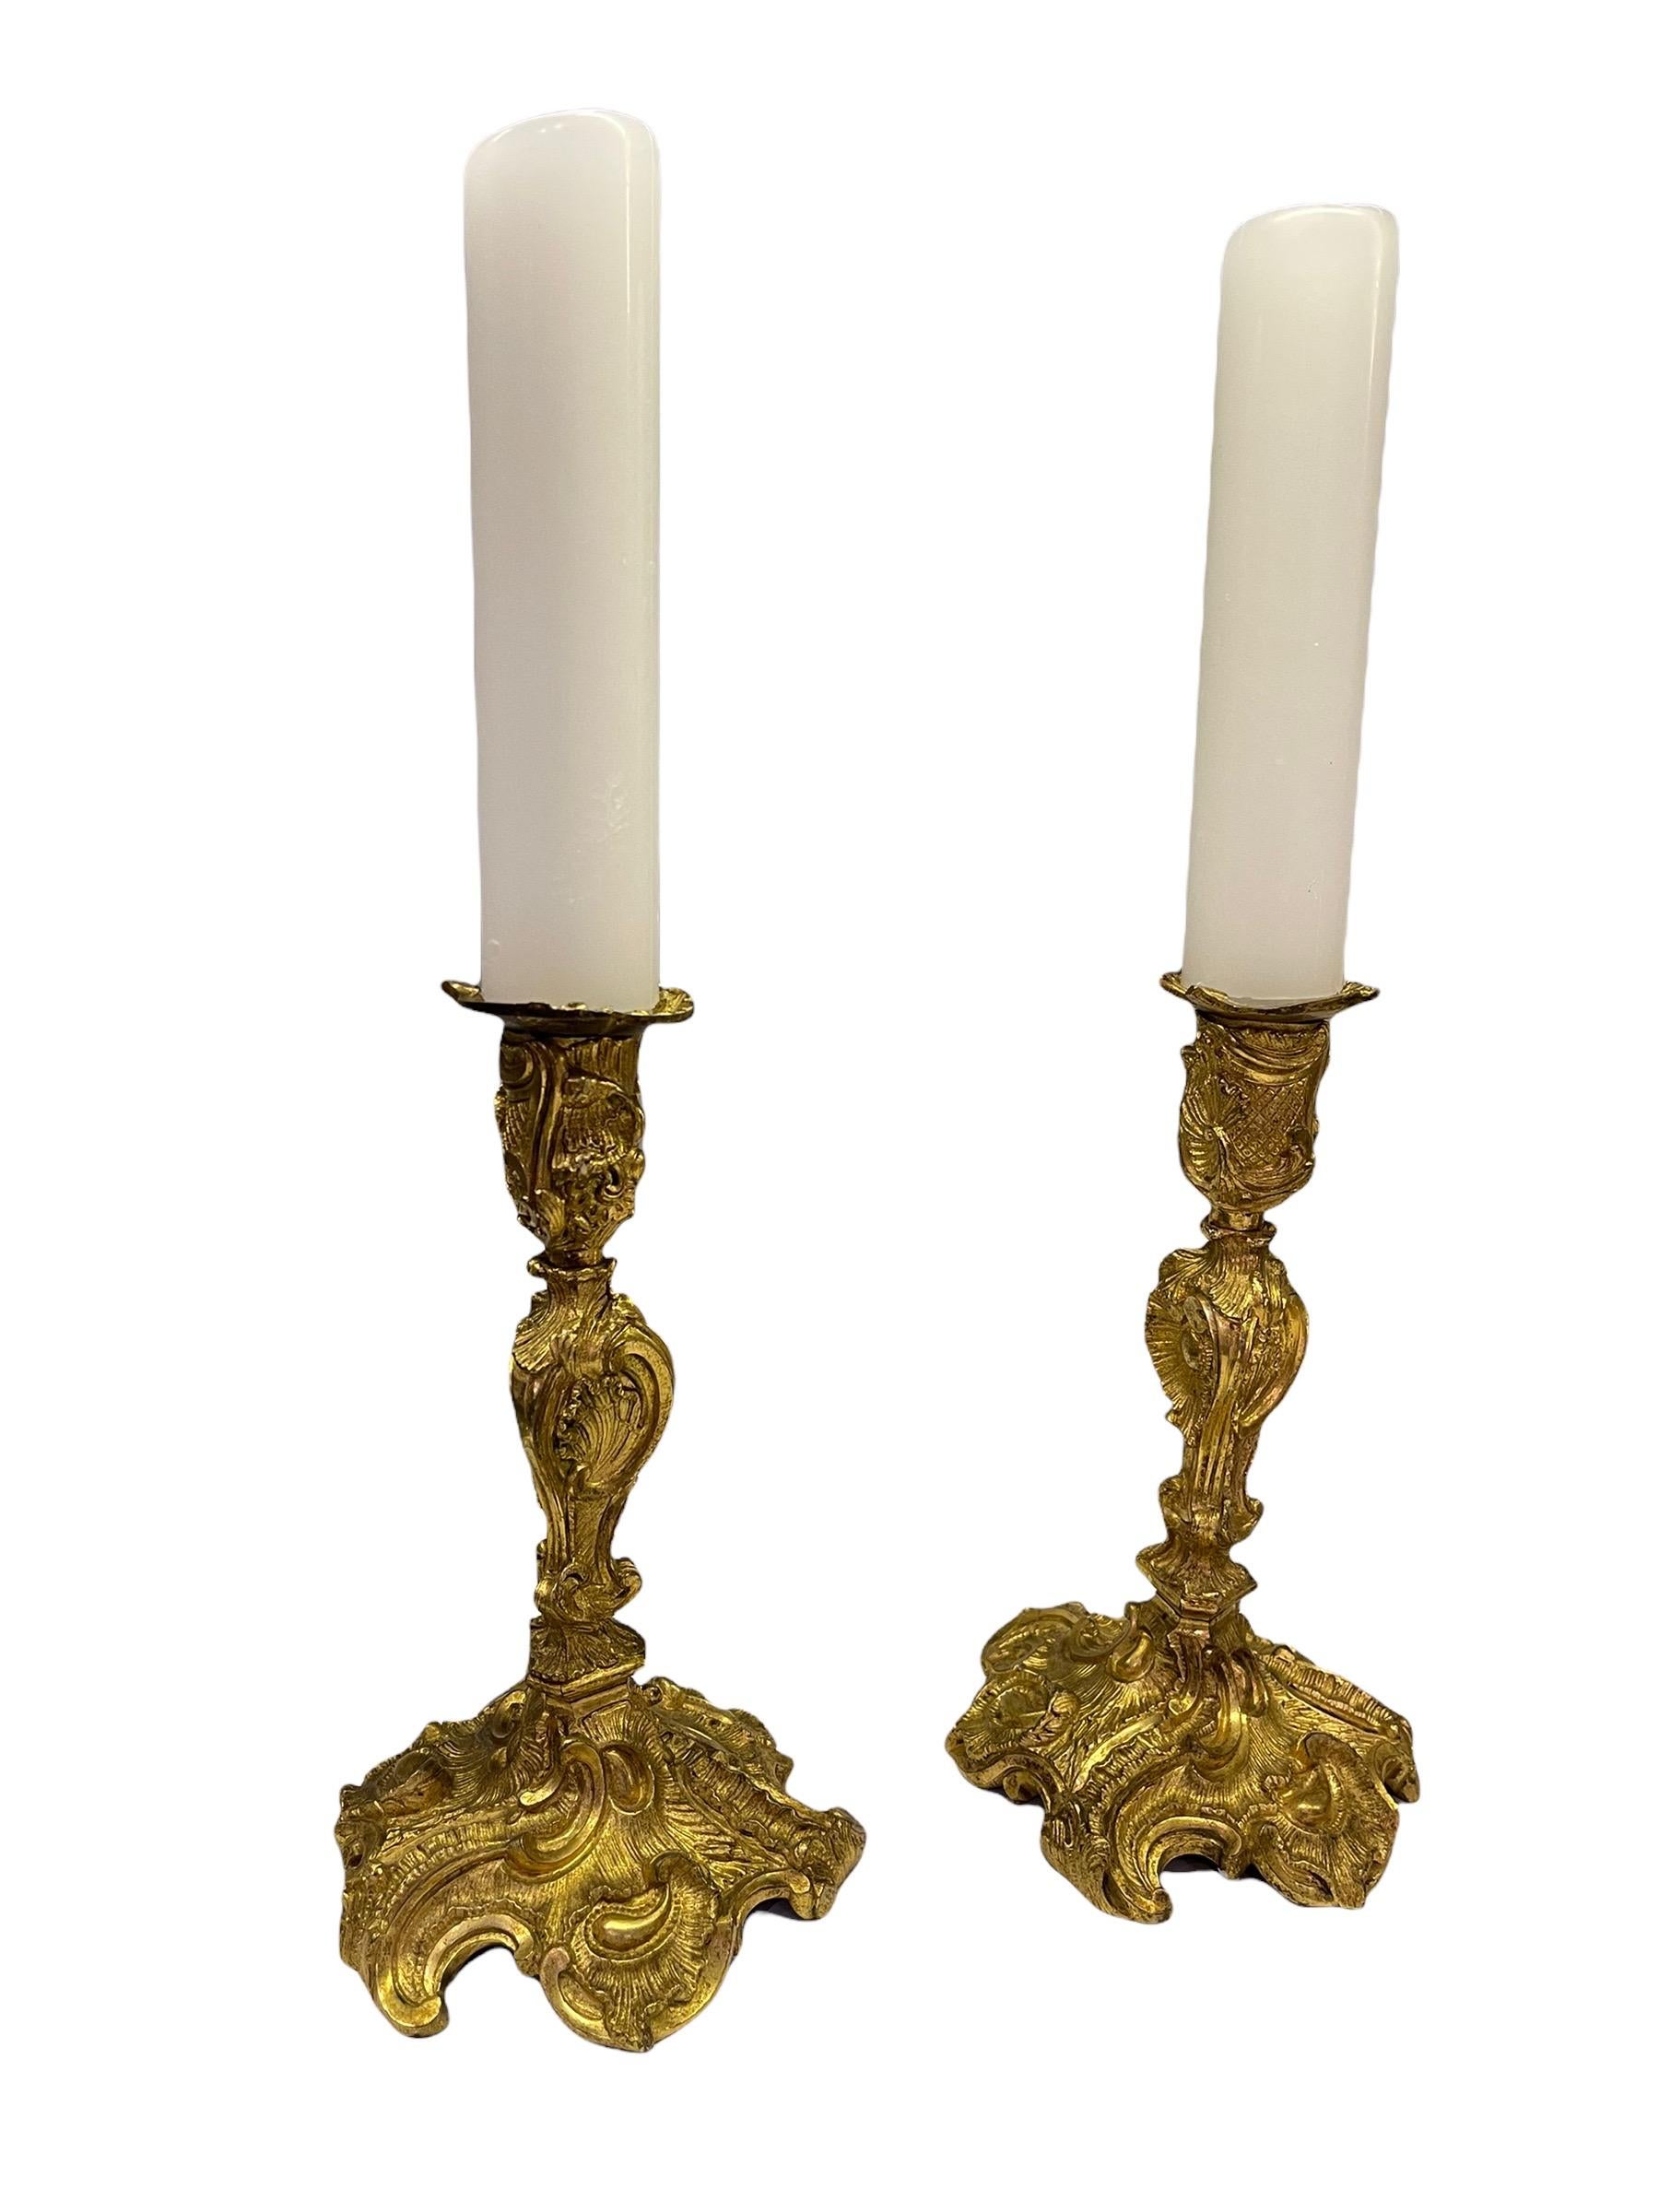 A pair French 18th Century bronze gold gilt candlesticks with the original drip catchers. The candle holders are decorated with sweeping scrolls in an organic composition A round base with stylized vines and scallops motifs. The seamed hollow stems